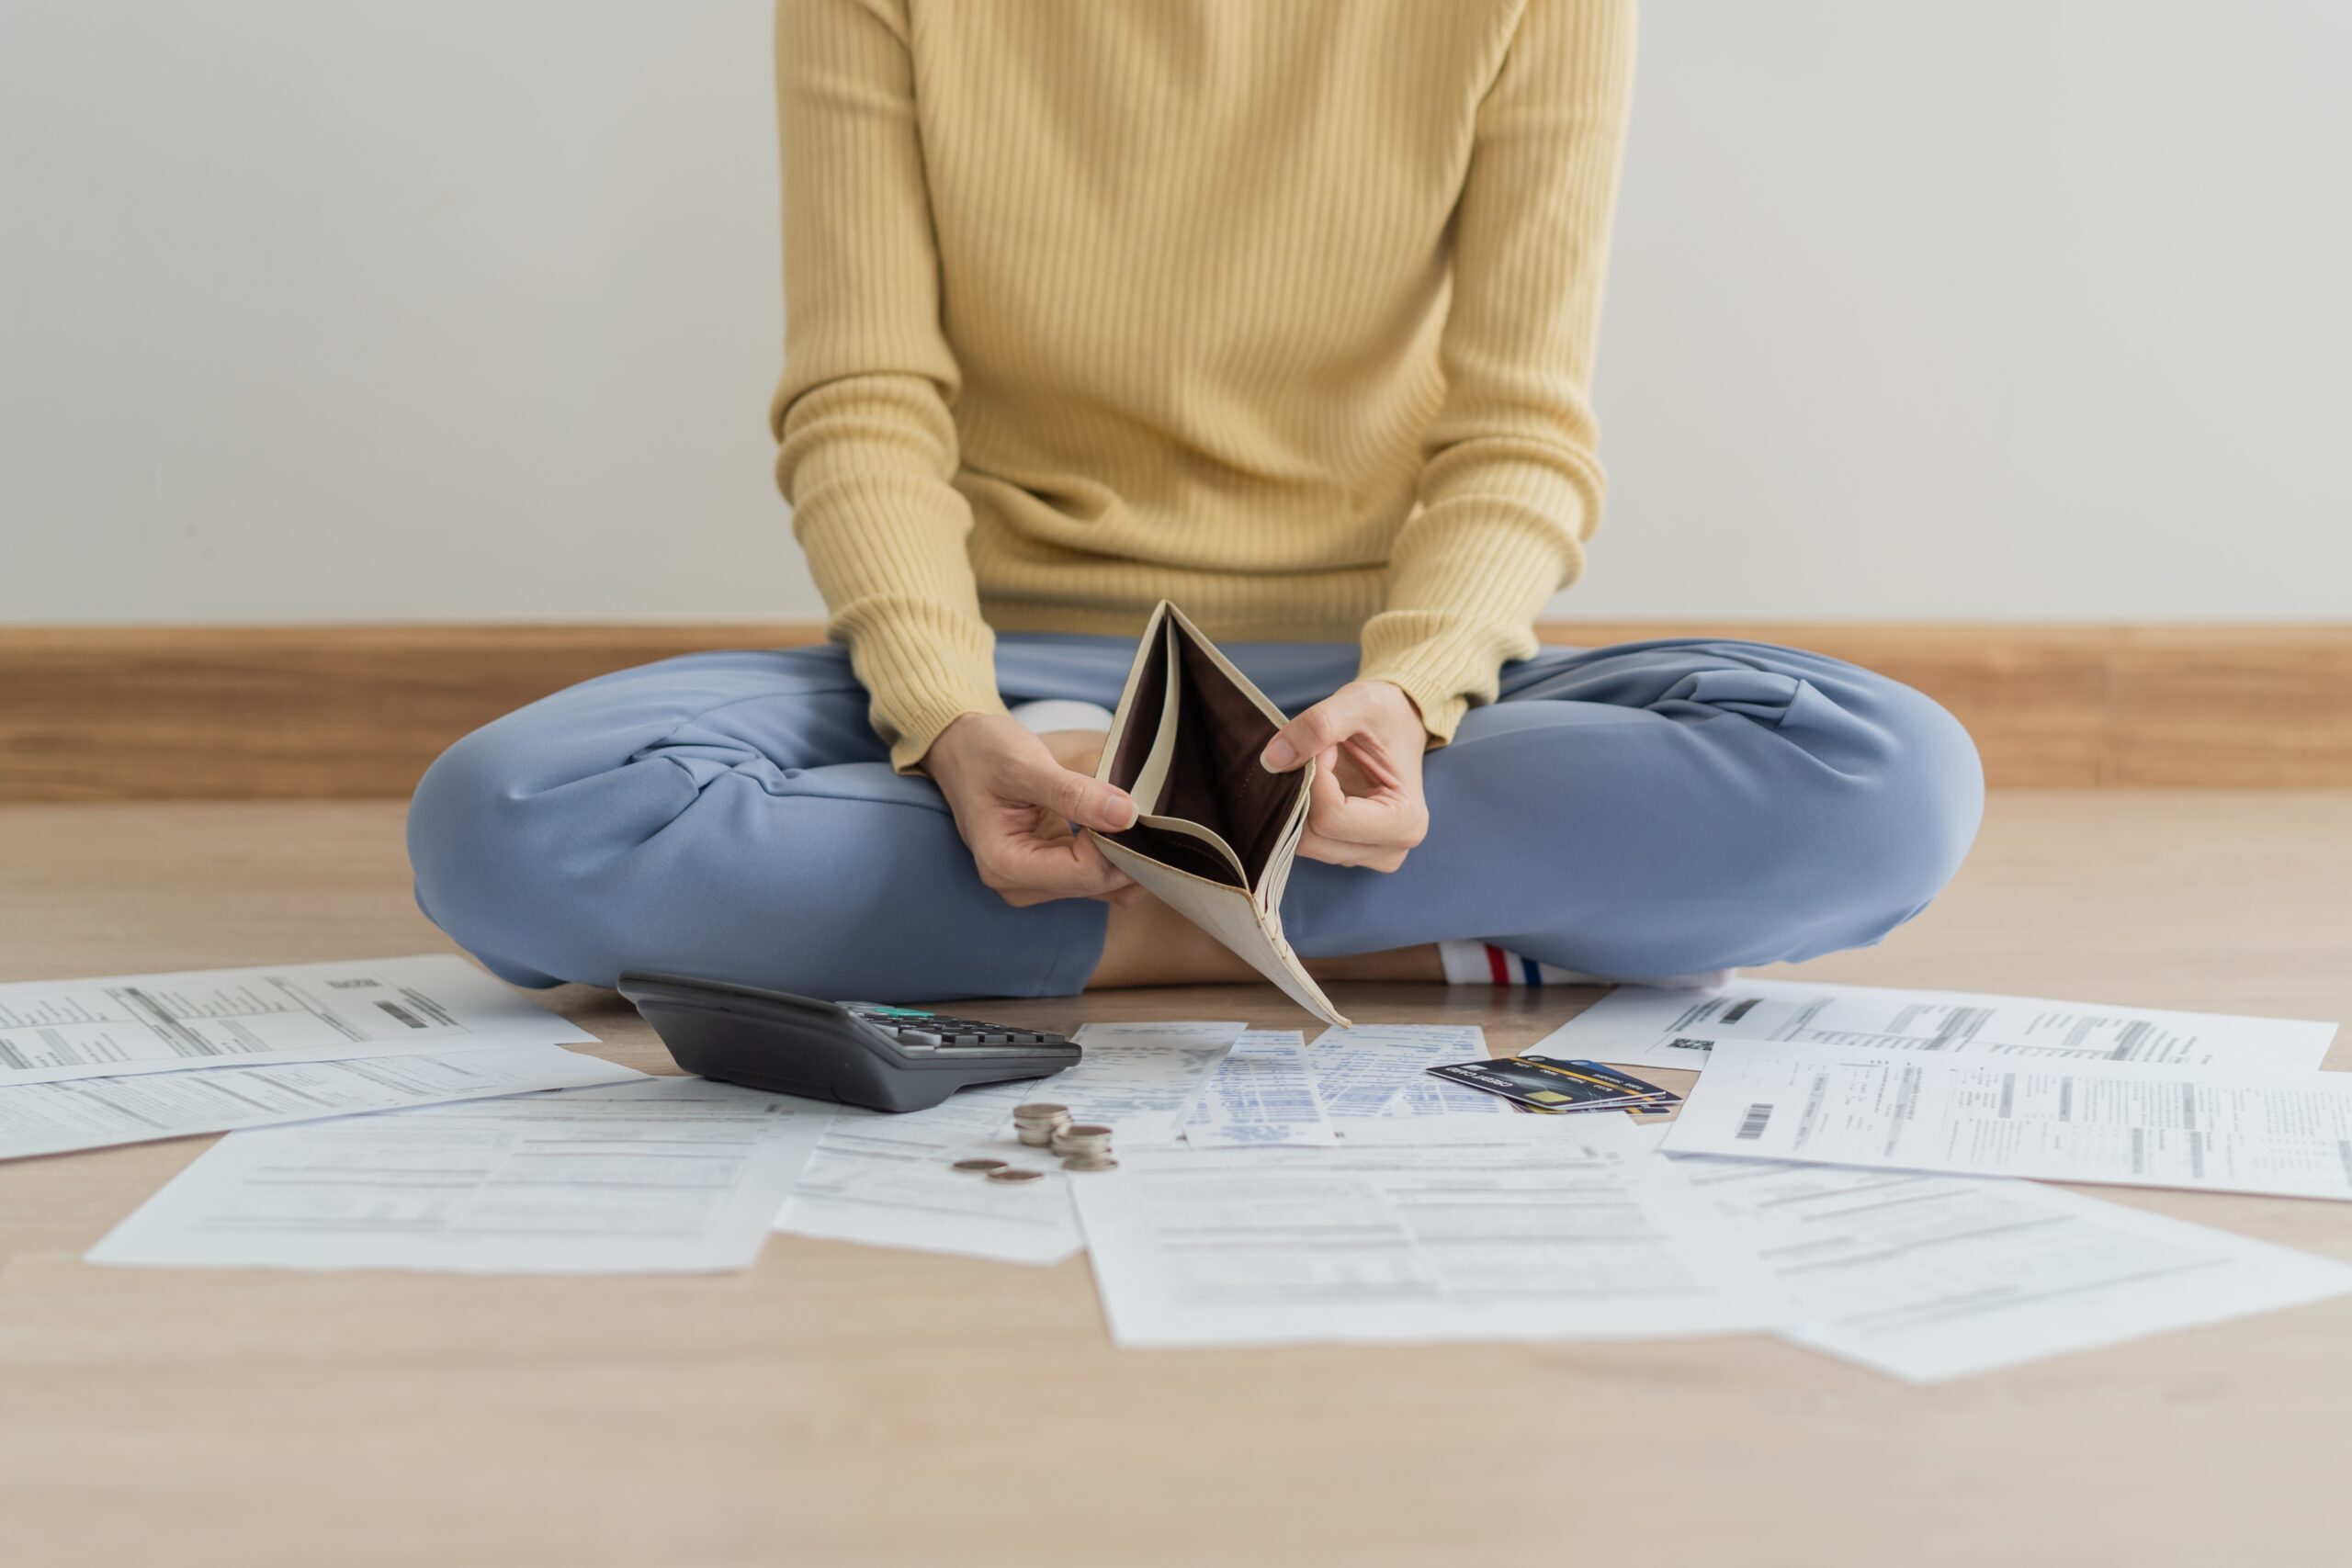 Woman Holding An Empty Wallet While Looking At A Pile Of Paperwork And A Calculator.